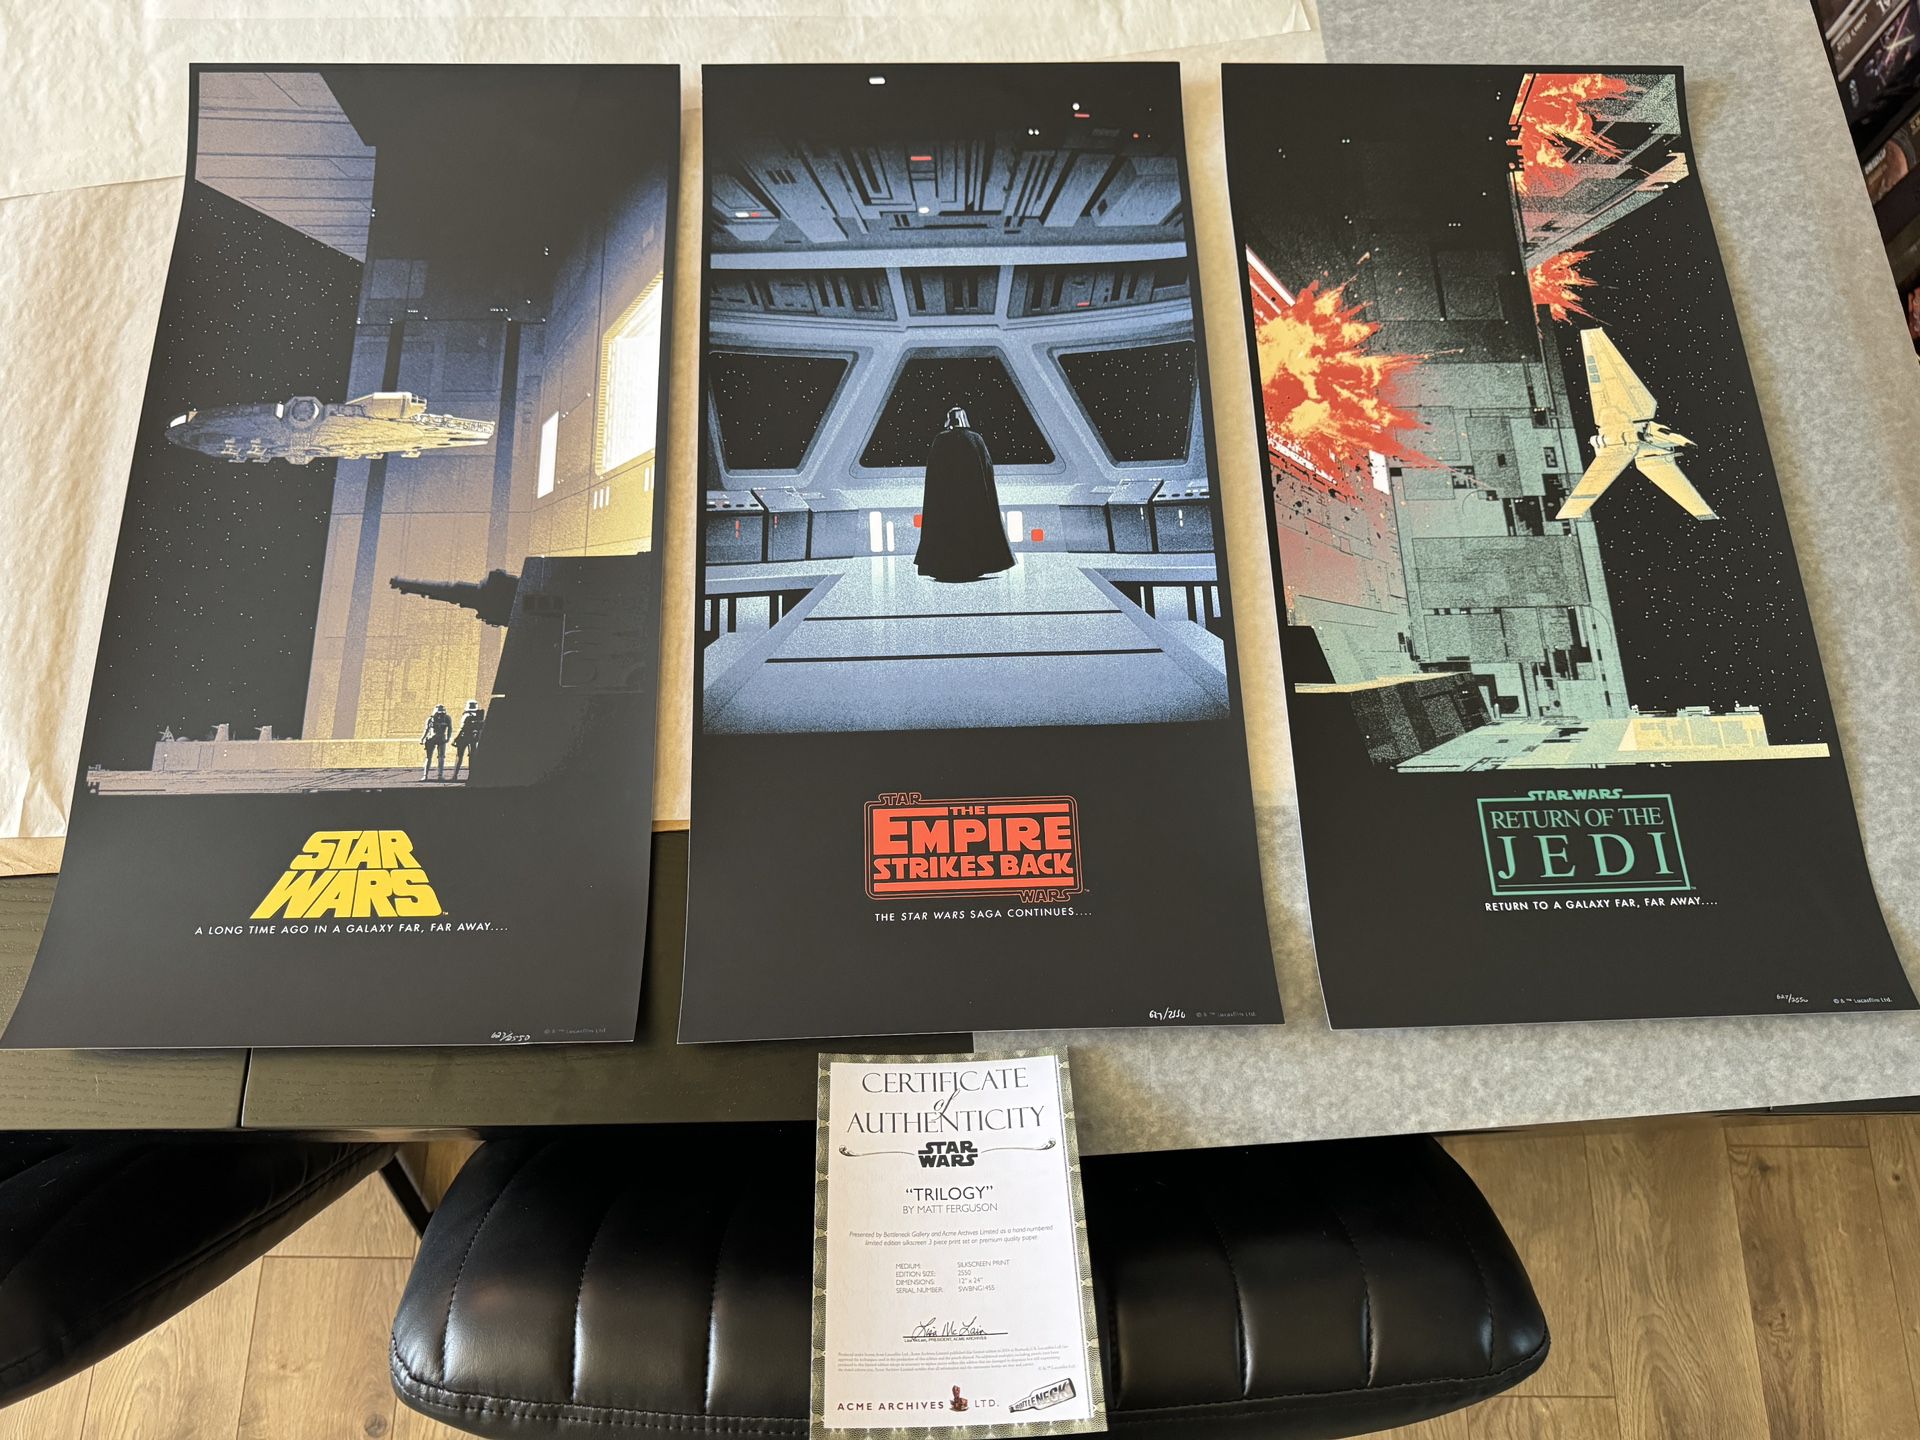 Star Wars Disney Art Print Posters Mint Condition Limited Edition Bottleneck Gallery